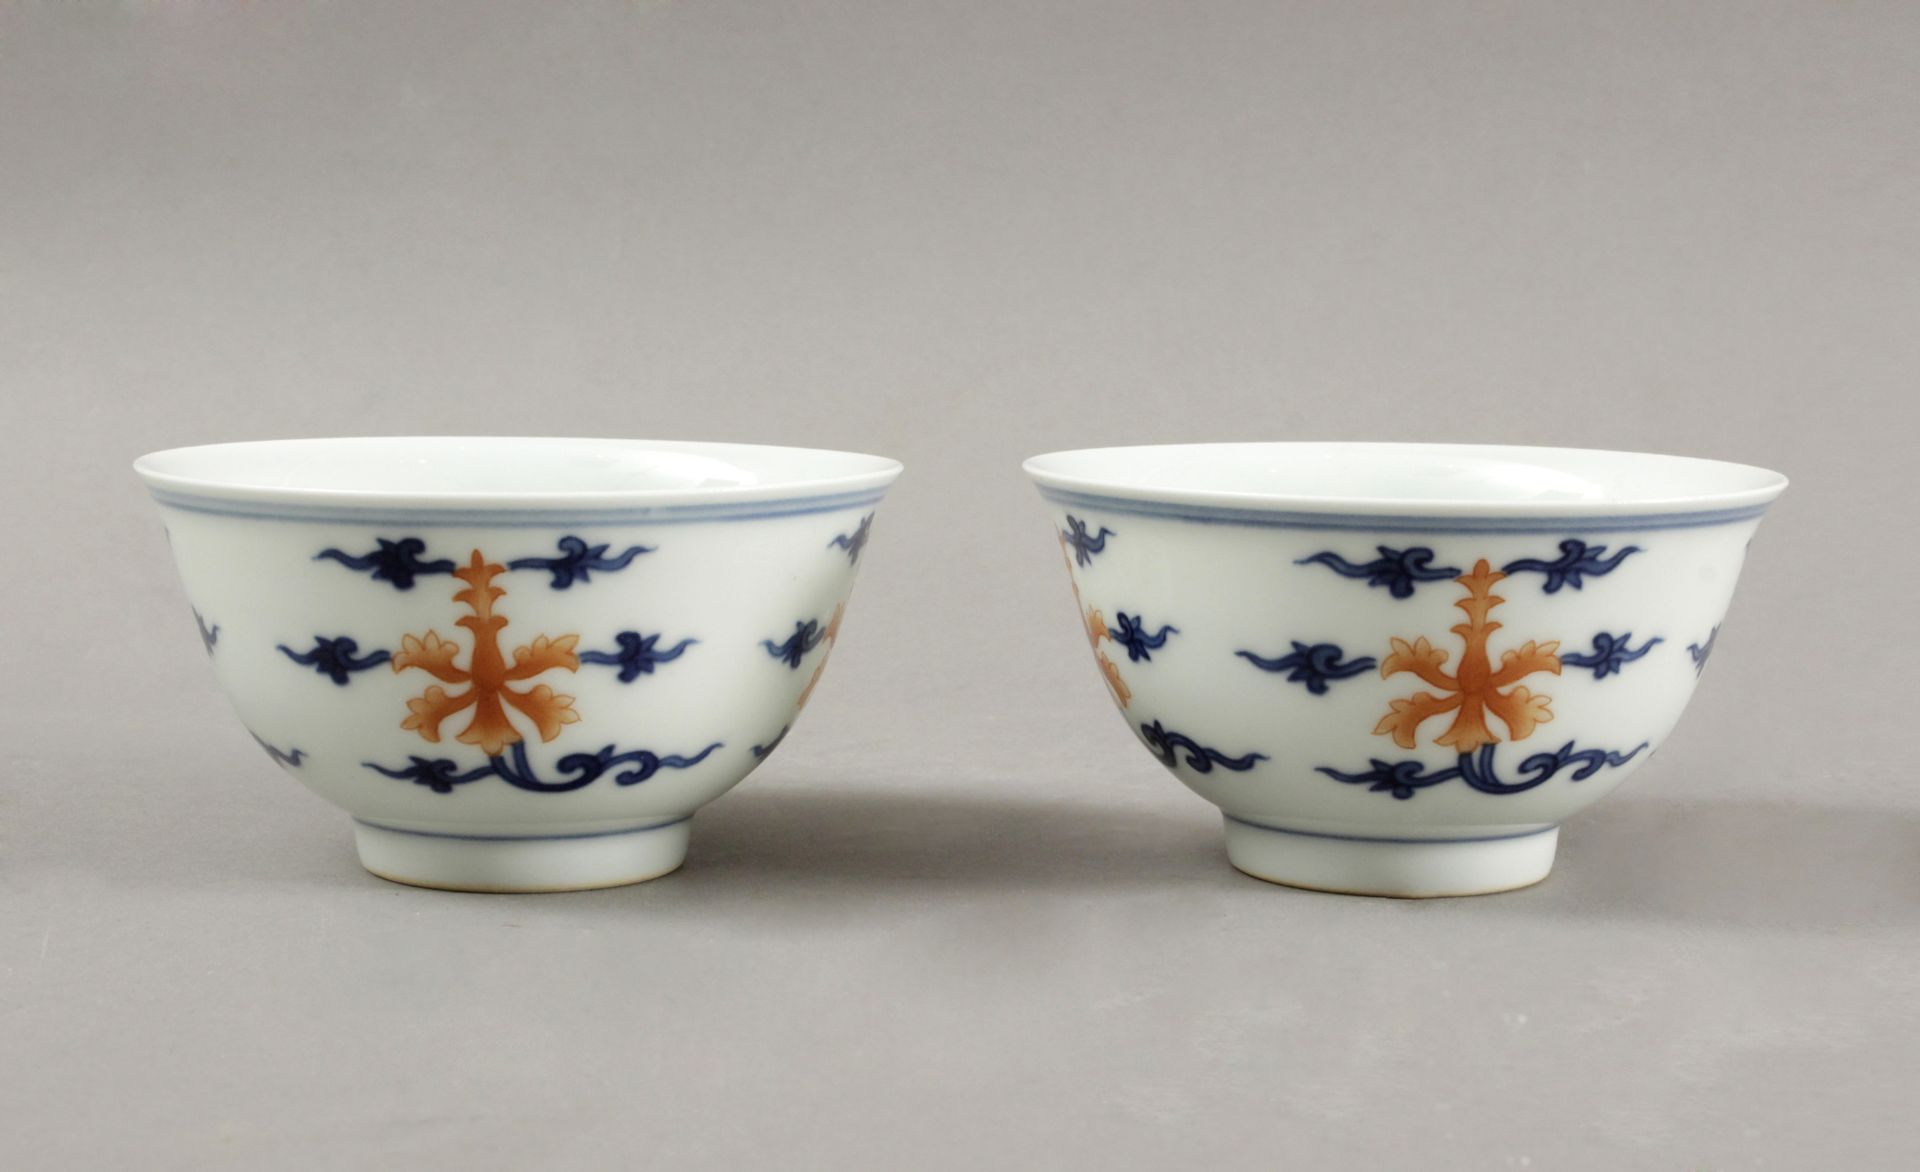 Pair of 20th century Chinese tea cups in blue and white porcelain